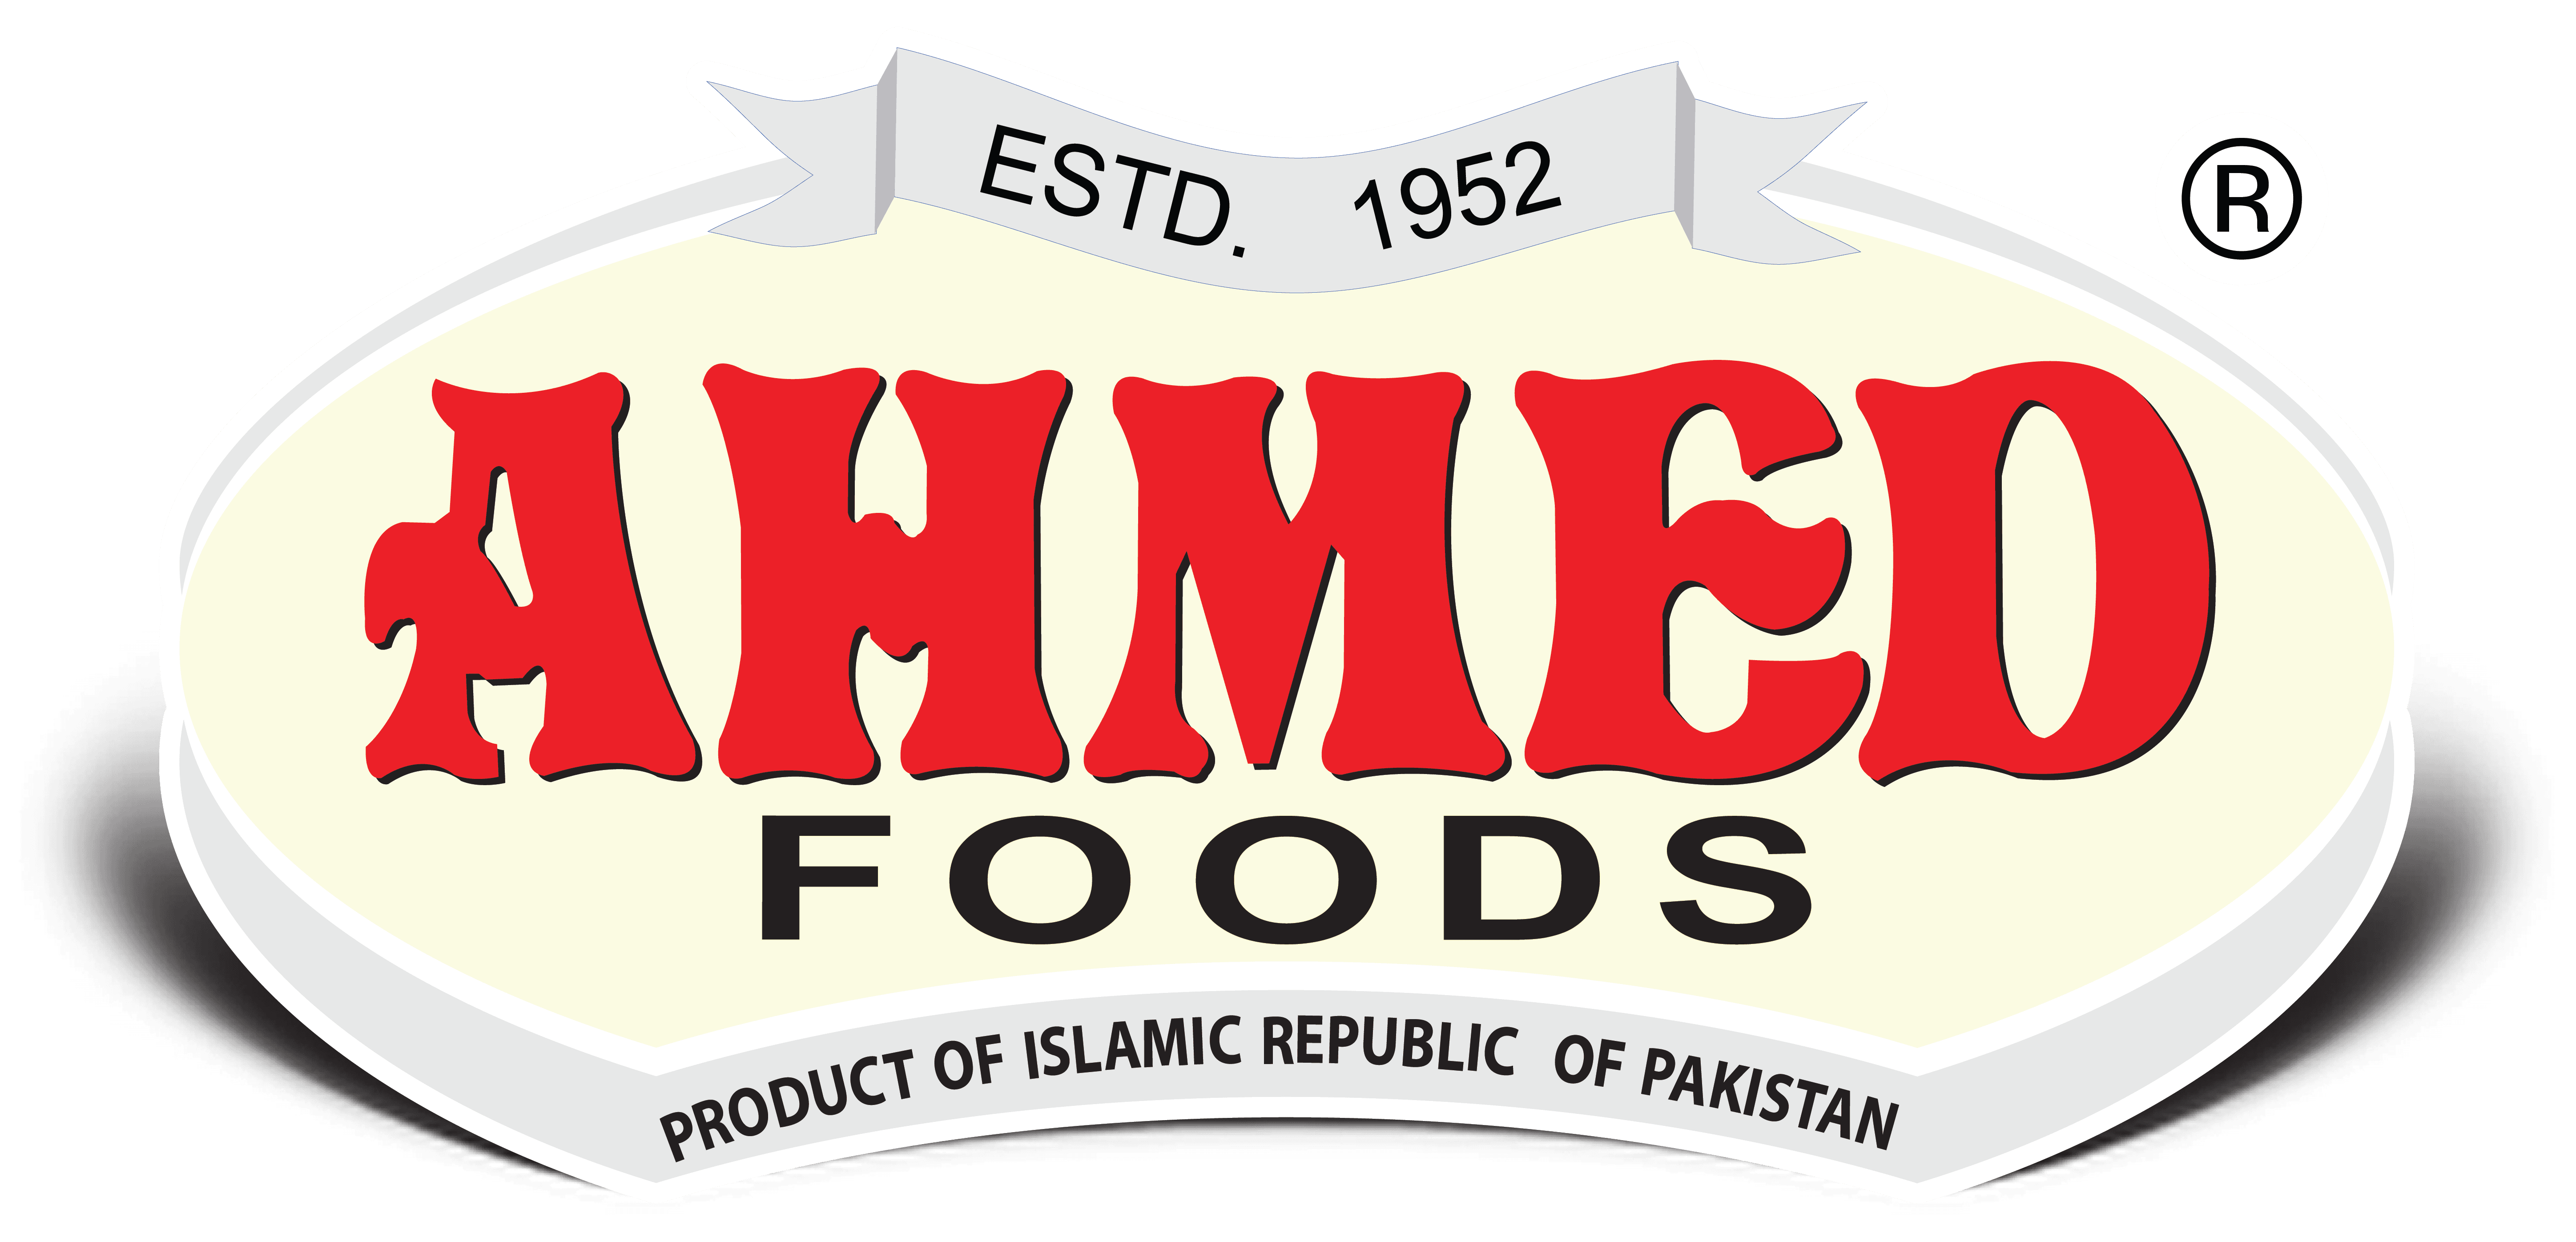 Ahmed Foods